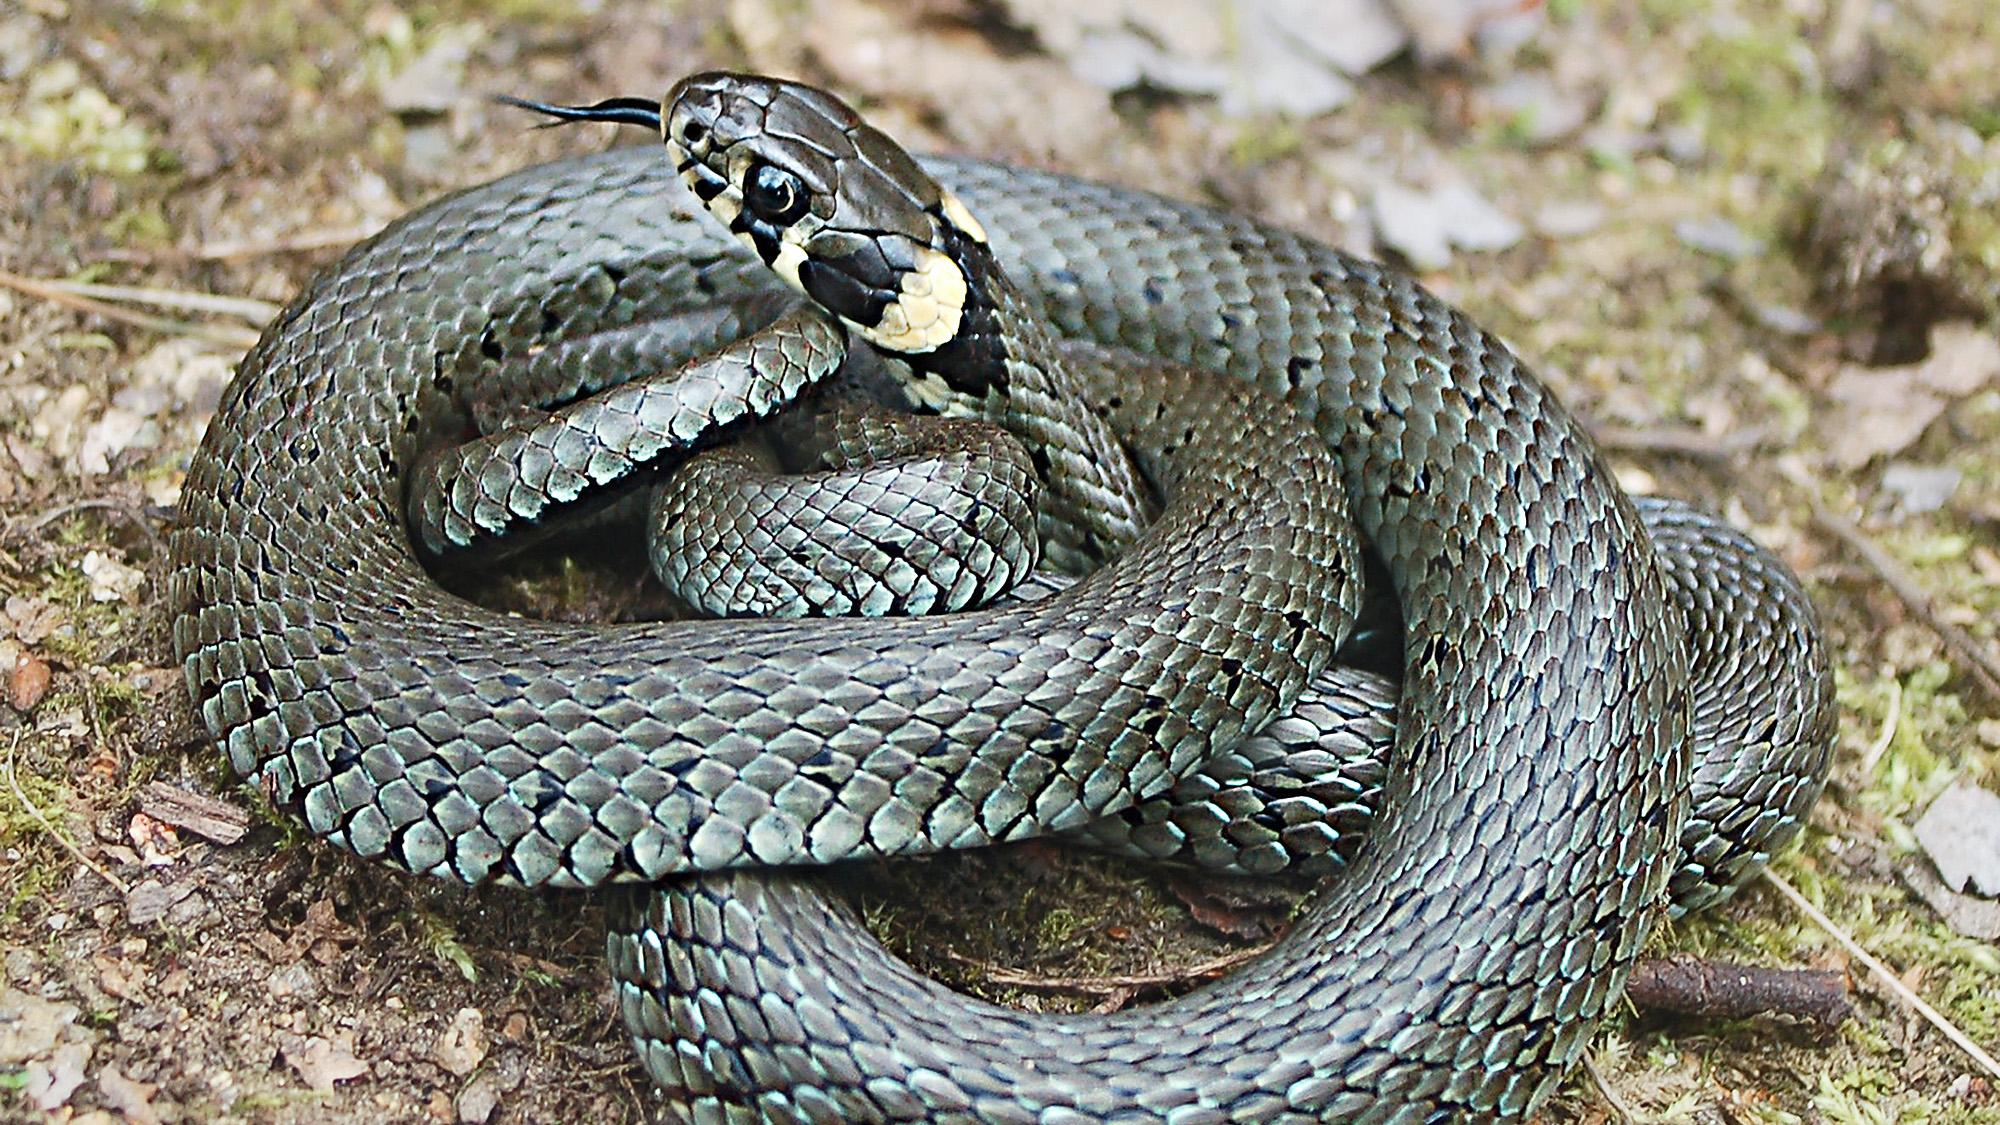 Snake's alive: fourth species found living in England | News | The Times